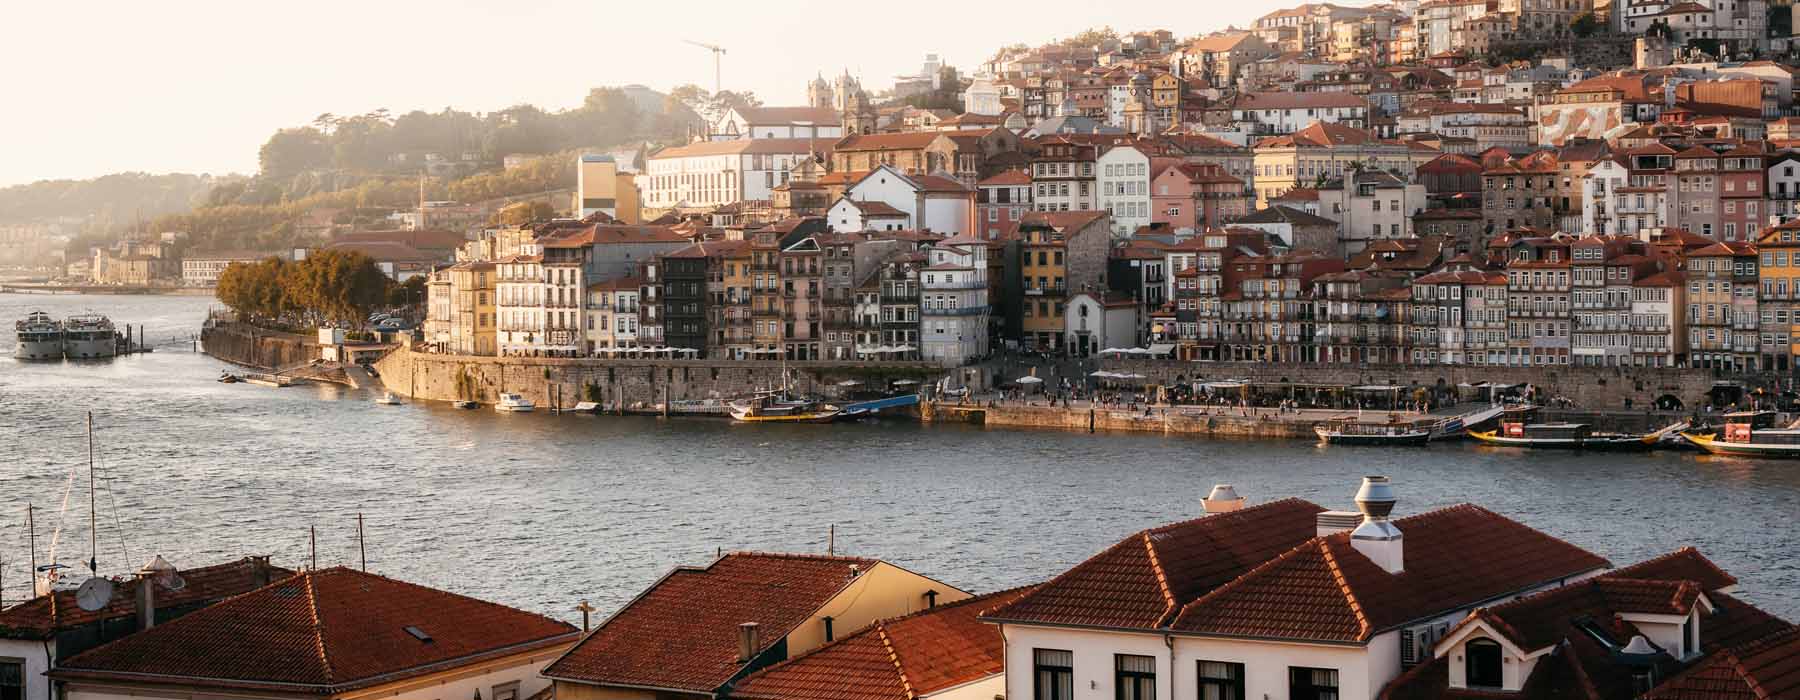 All our Portugal Itinerary<br class="hidden-md hidden-lg" /> holidays